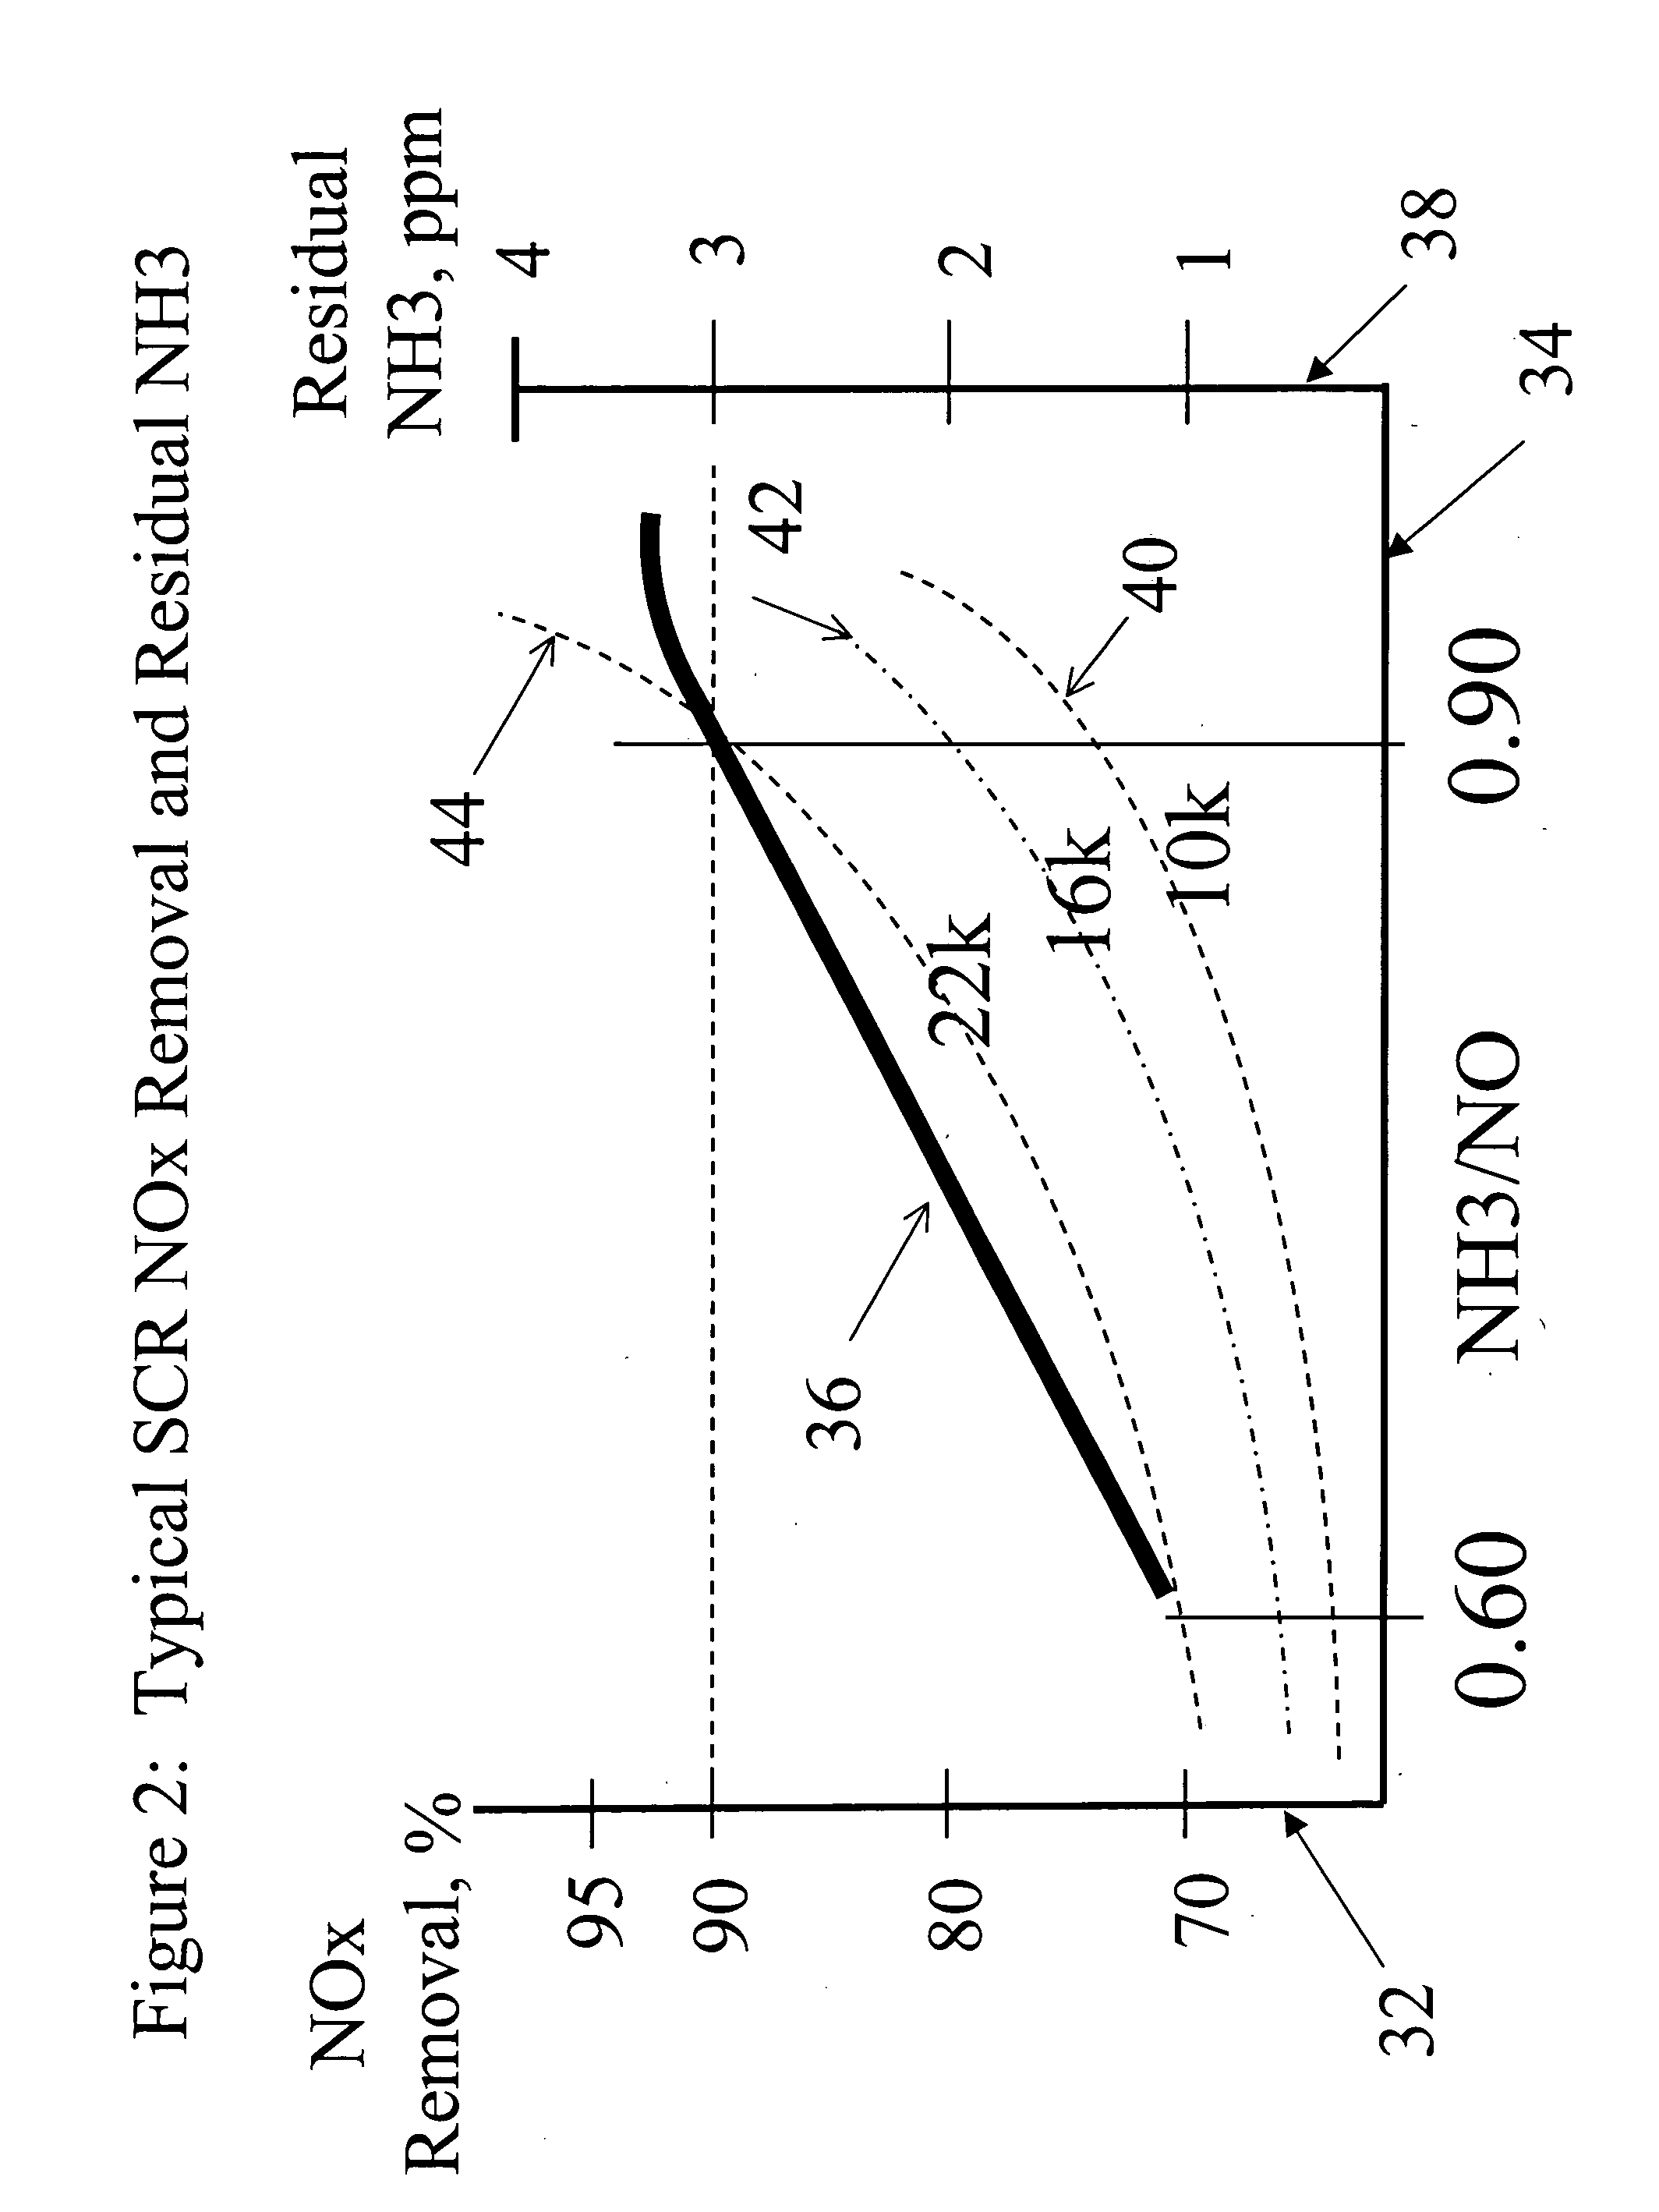 Multi-stage heat absorbing reactor and process for SCR of NOx and for oxidation of elemental mercury